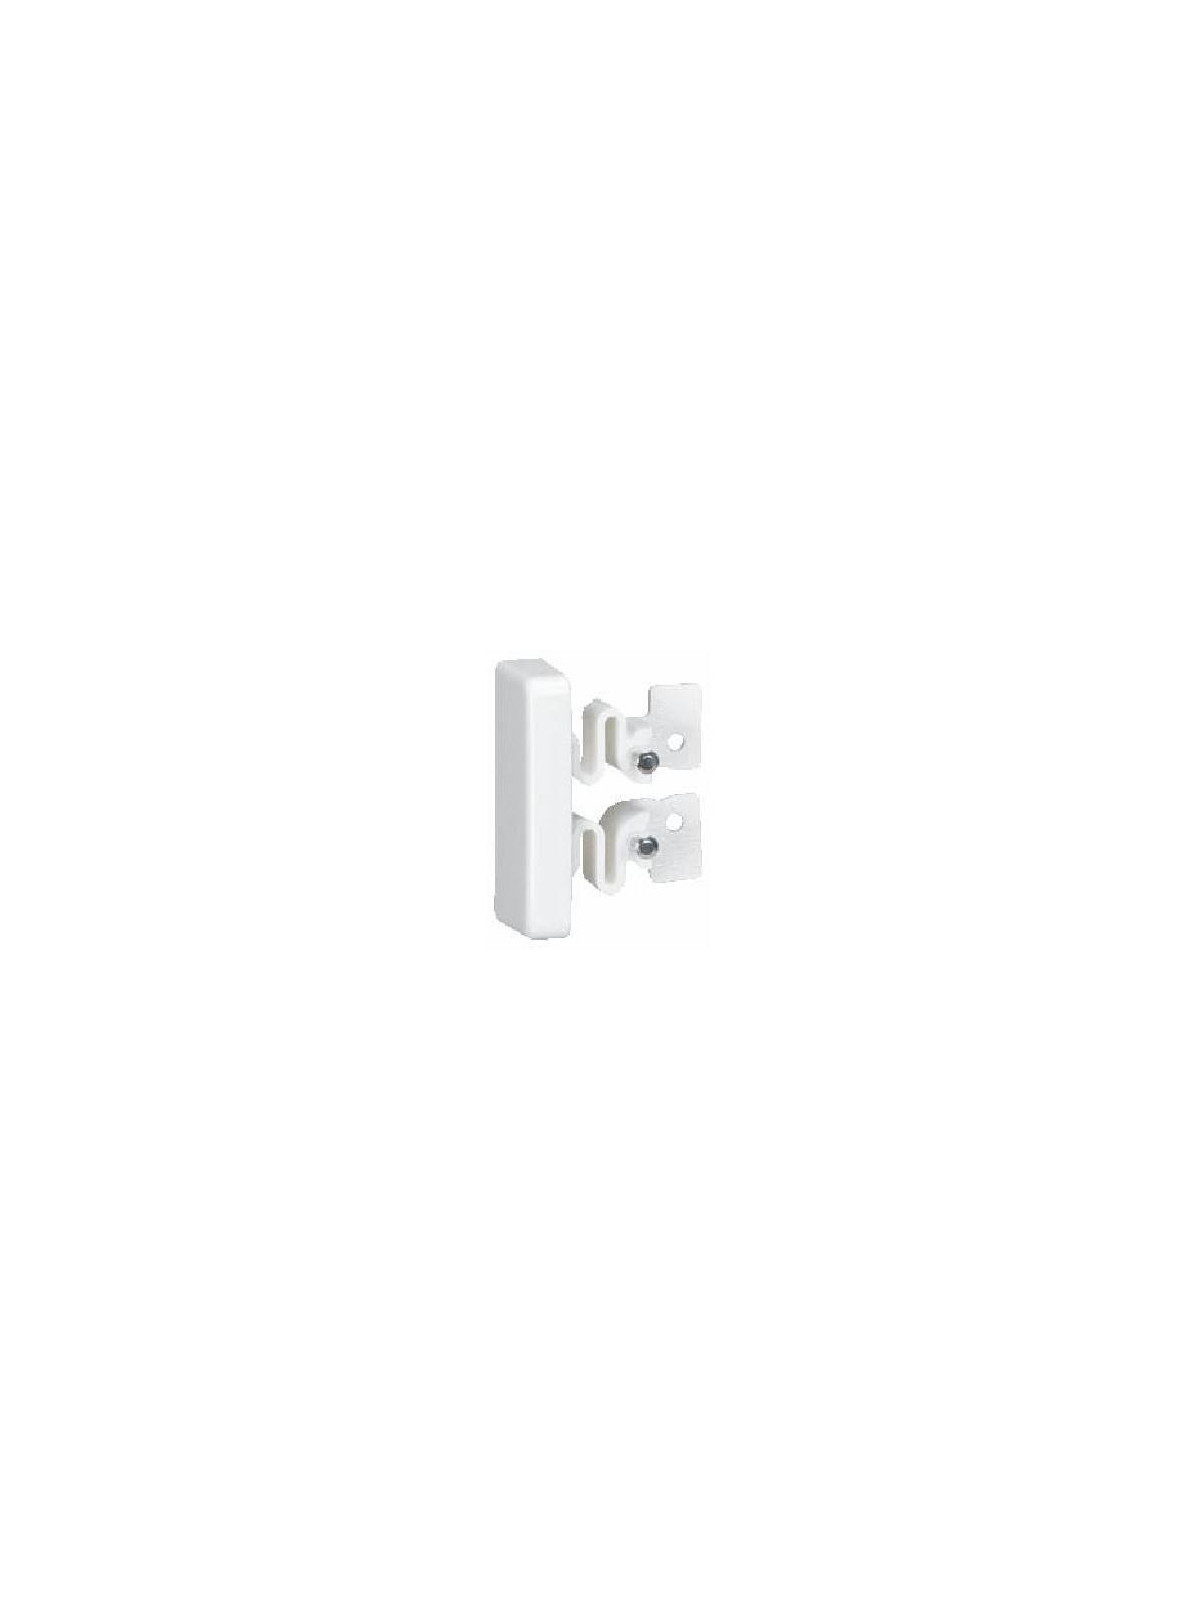 Self-locking end cap, left or right, for 40 x 25mm trunking